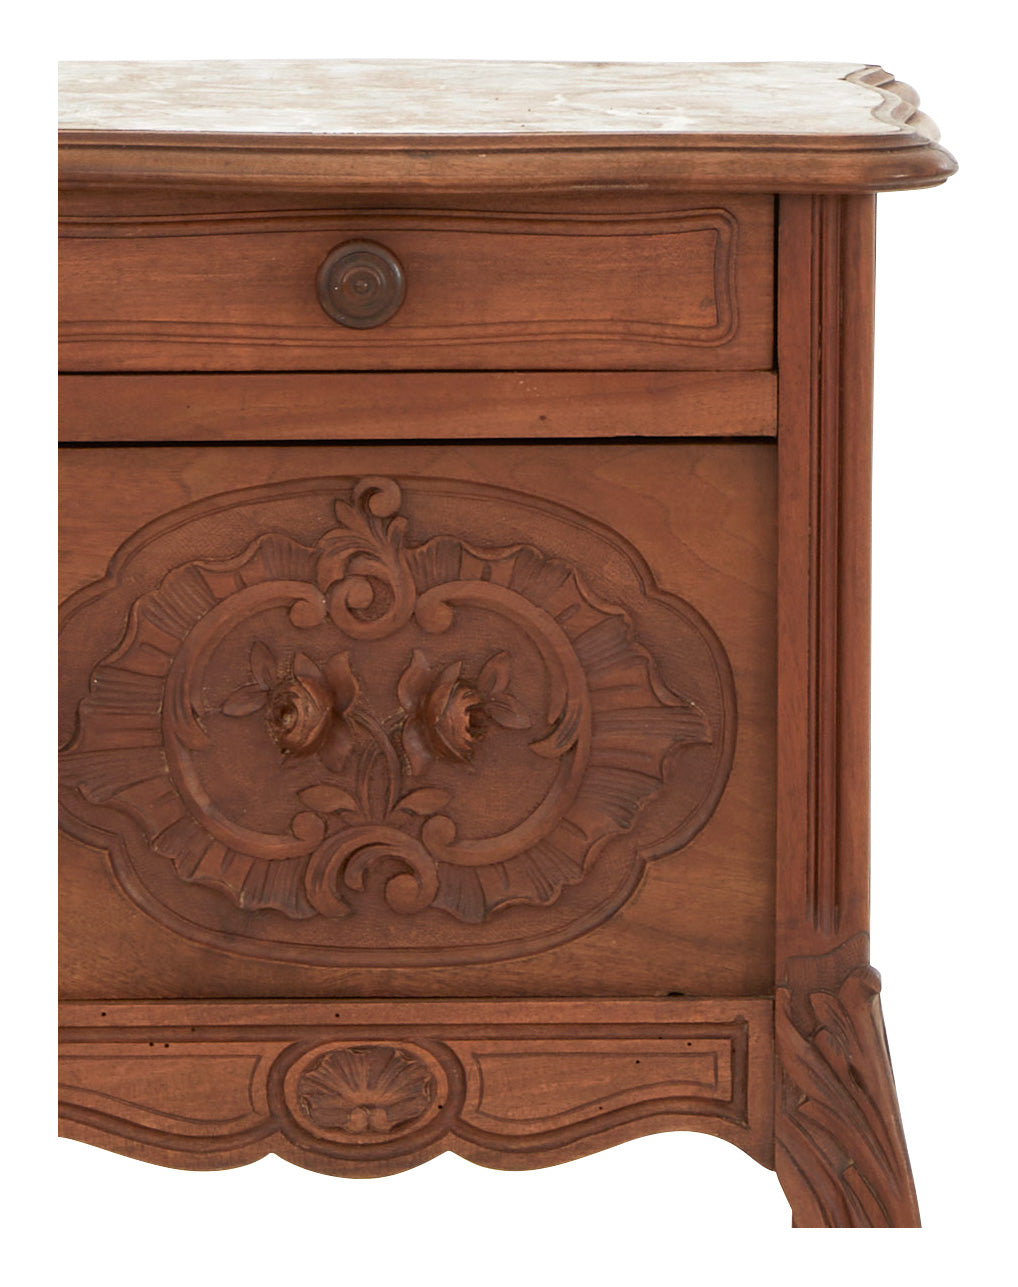 Antique Carved Nightstand